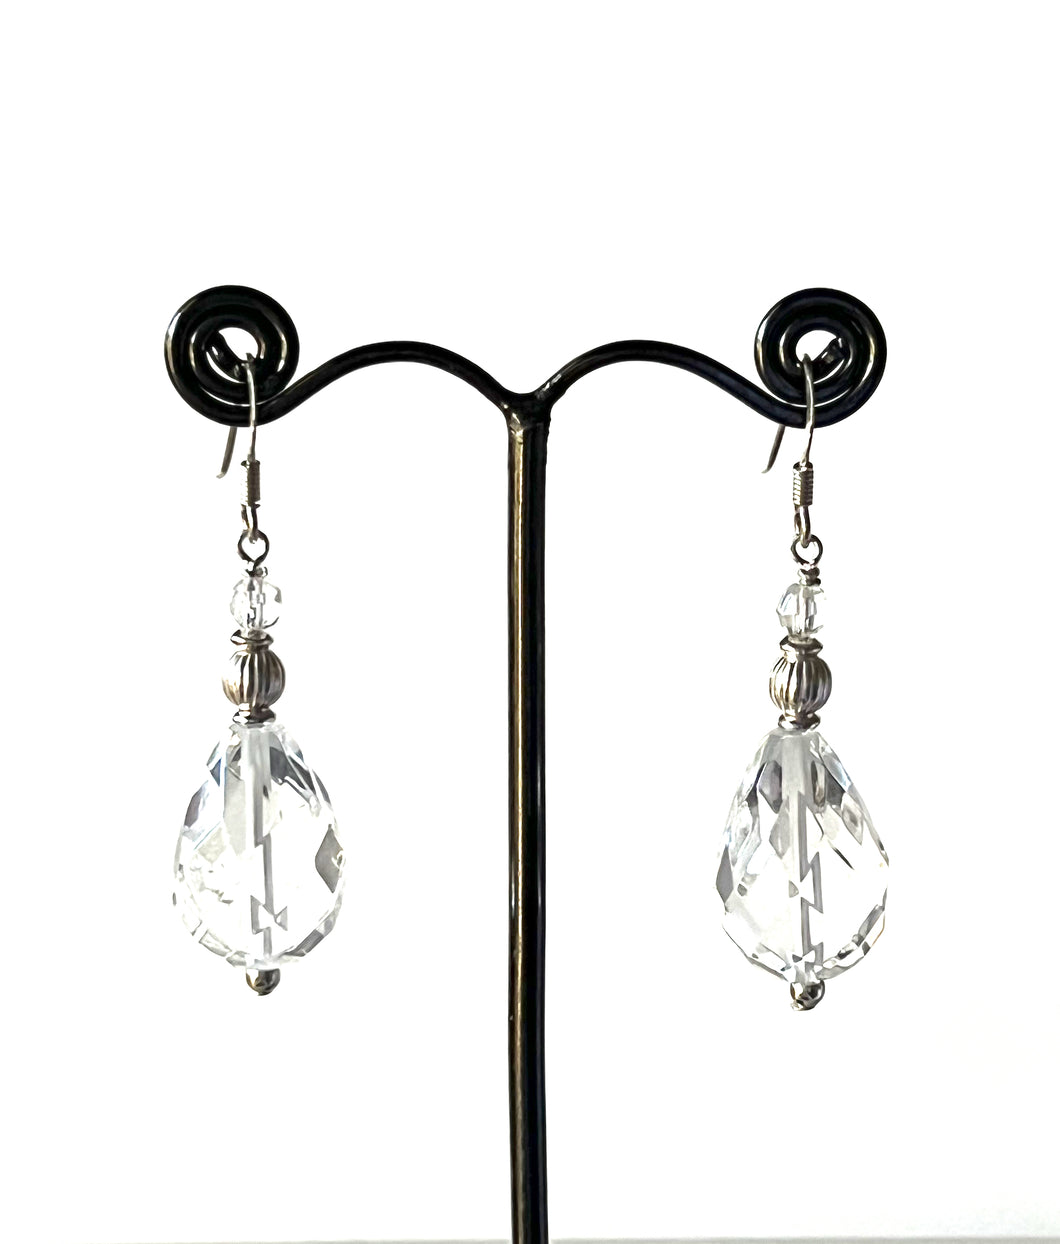 Clear Facetted Quartz Earrings with Decorative Sterling Silver Bead